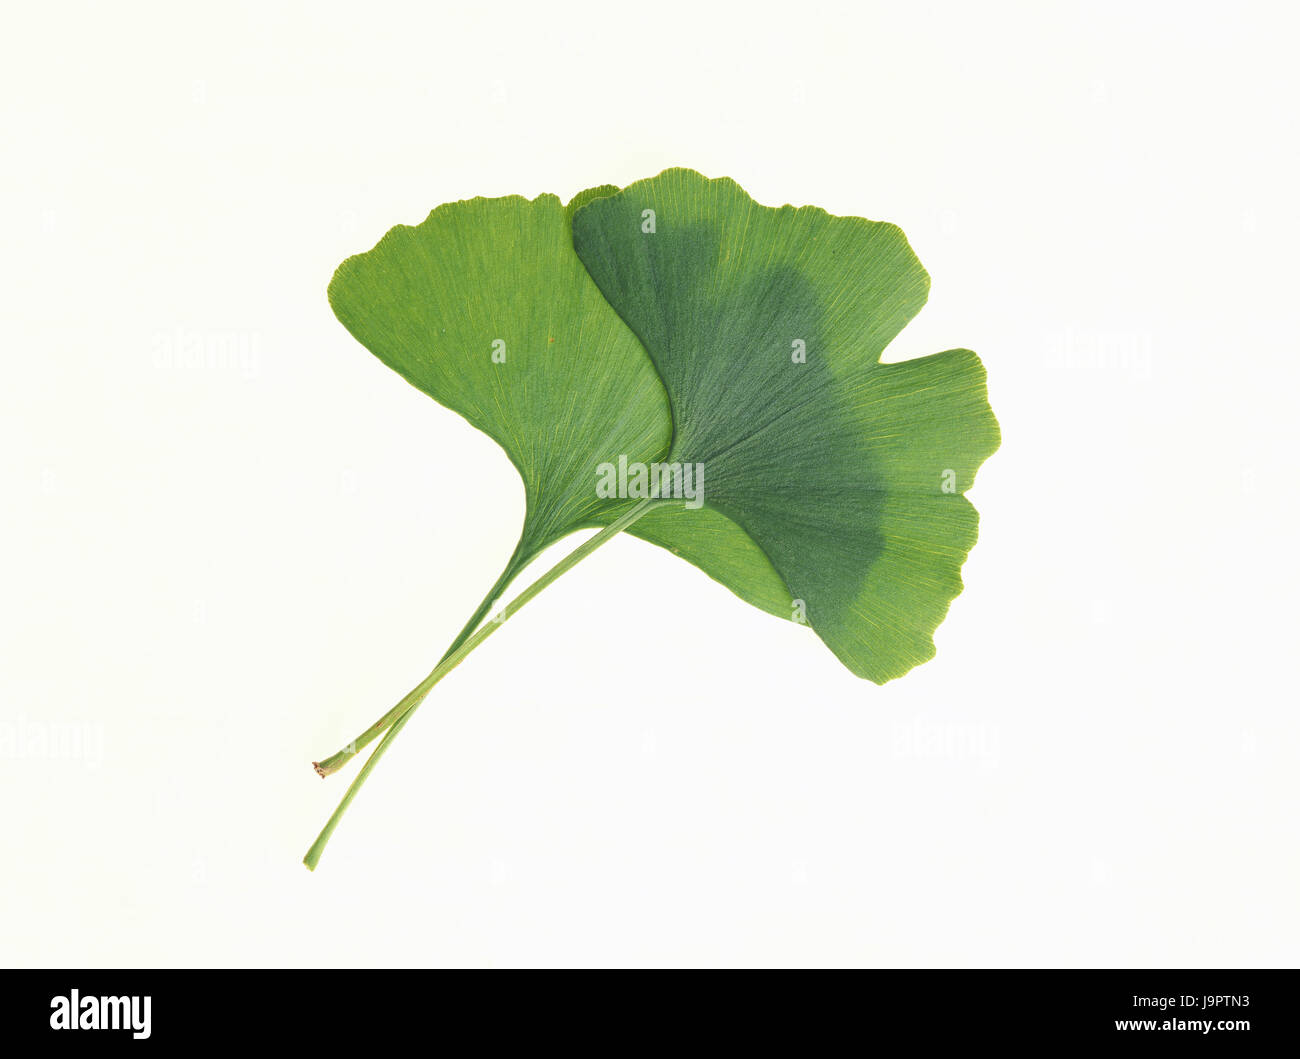 Ginkgo leaves,ginkgo biloba,plants,Asian,medicinal plants,ginkgo,medicament plant,nature drug,ginkgo leaves,leaves,two,green,professional-shaped,professional leaf tree,icon,longevity,fertility icon,yin yang,object photography,Frei's plate,studio, Stock Photo